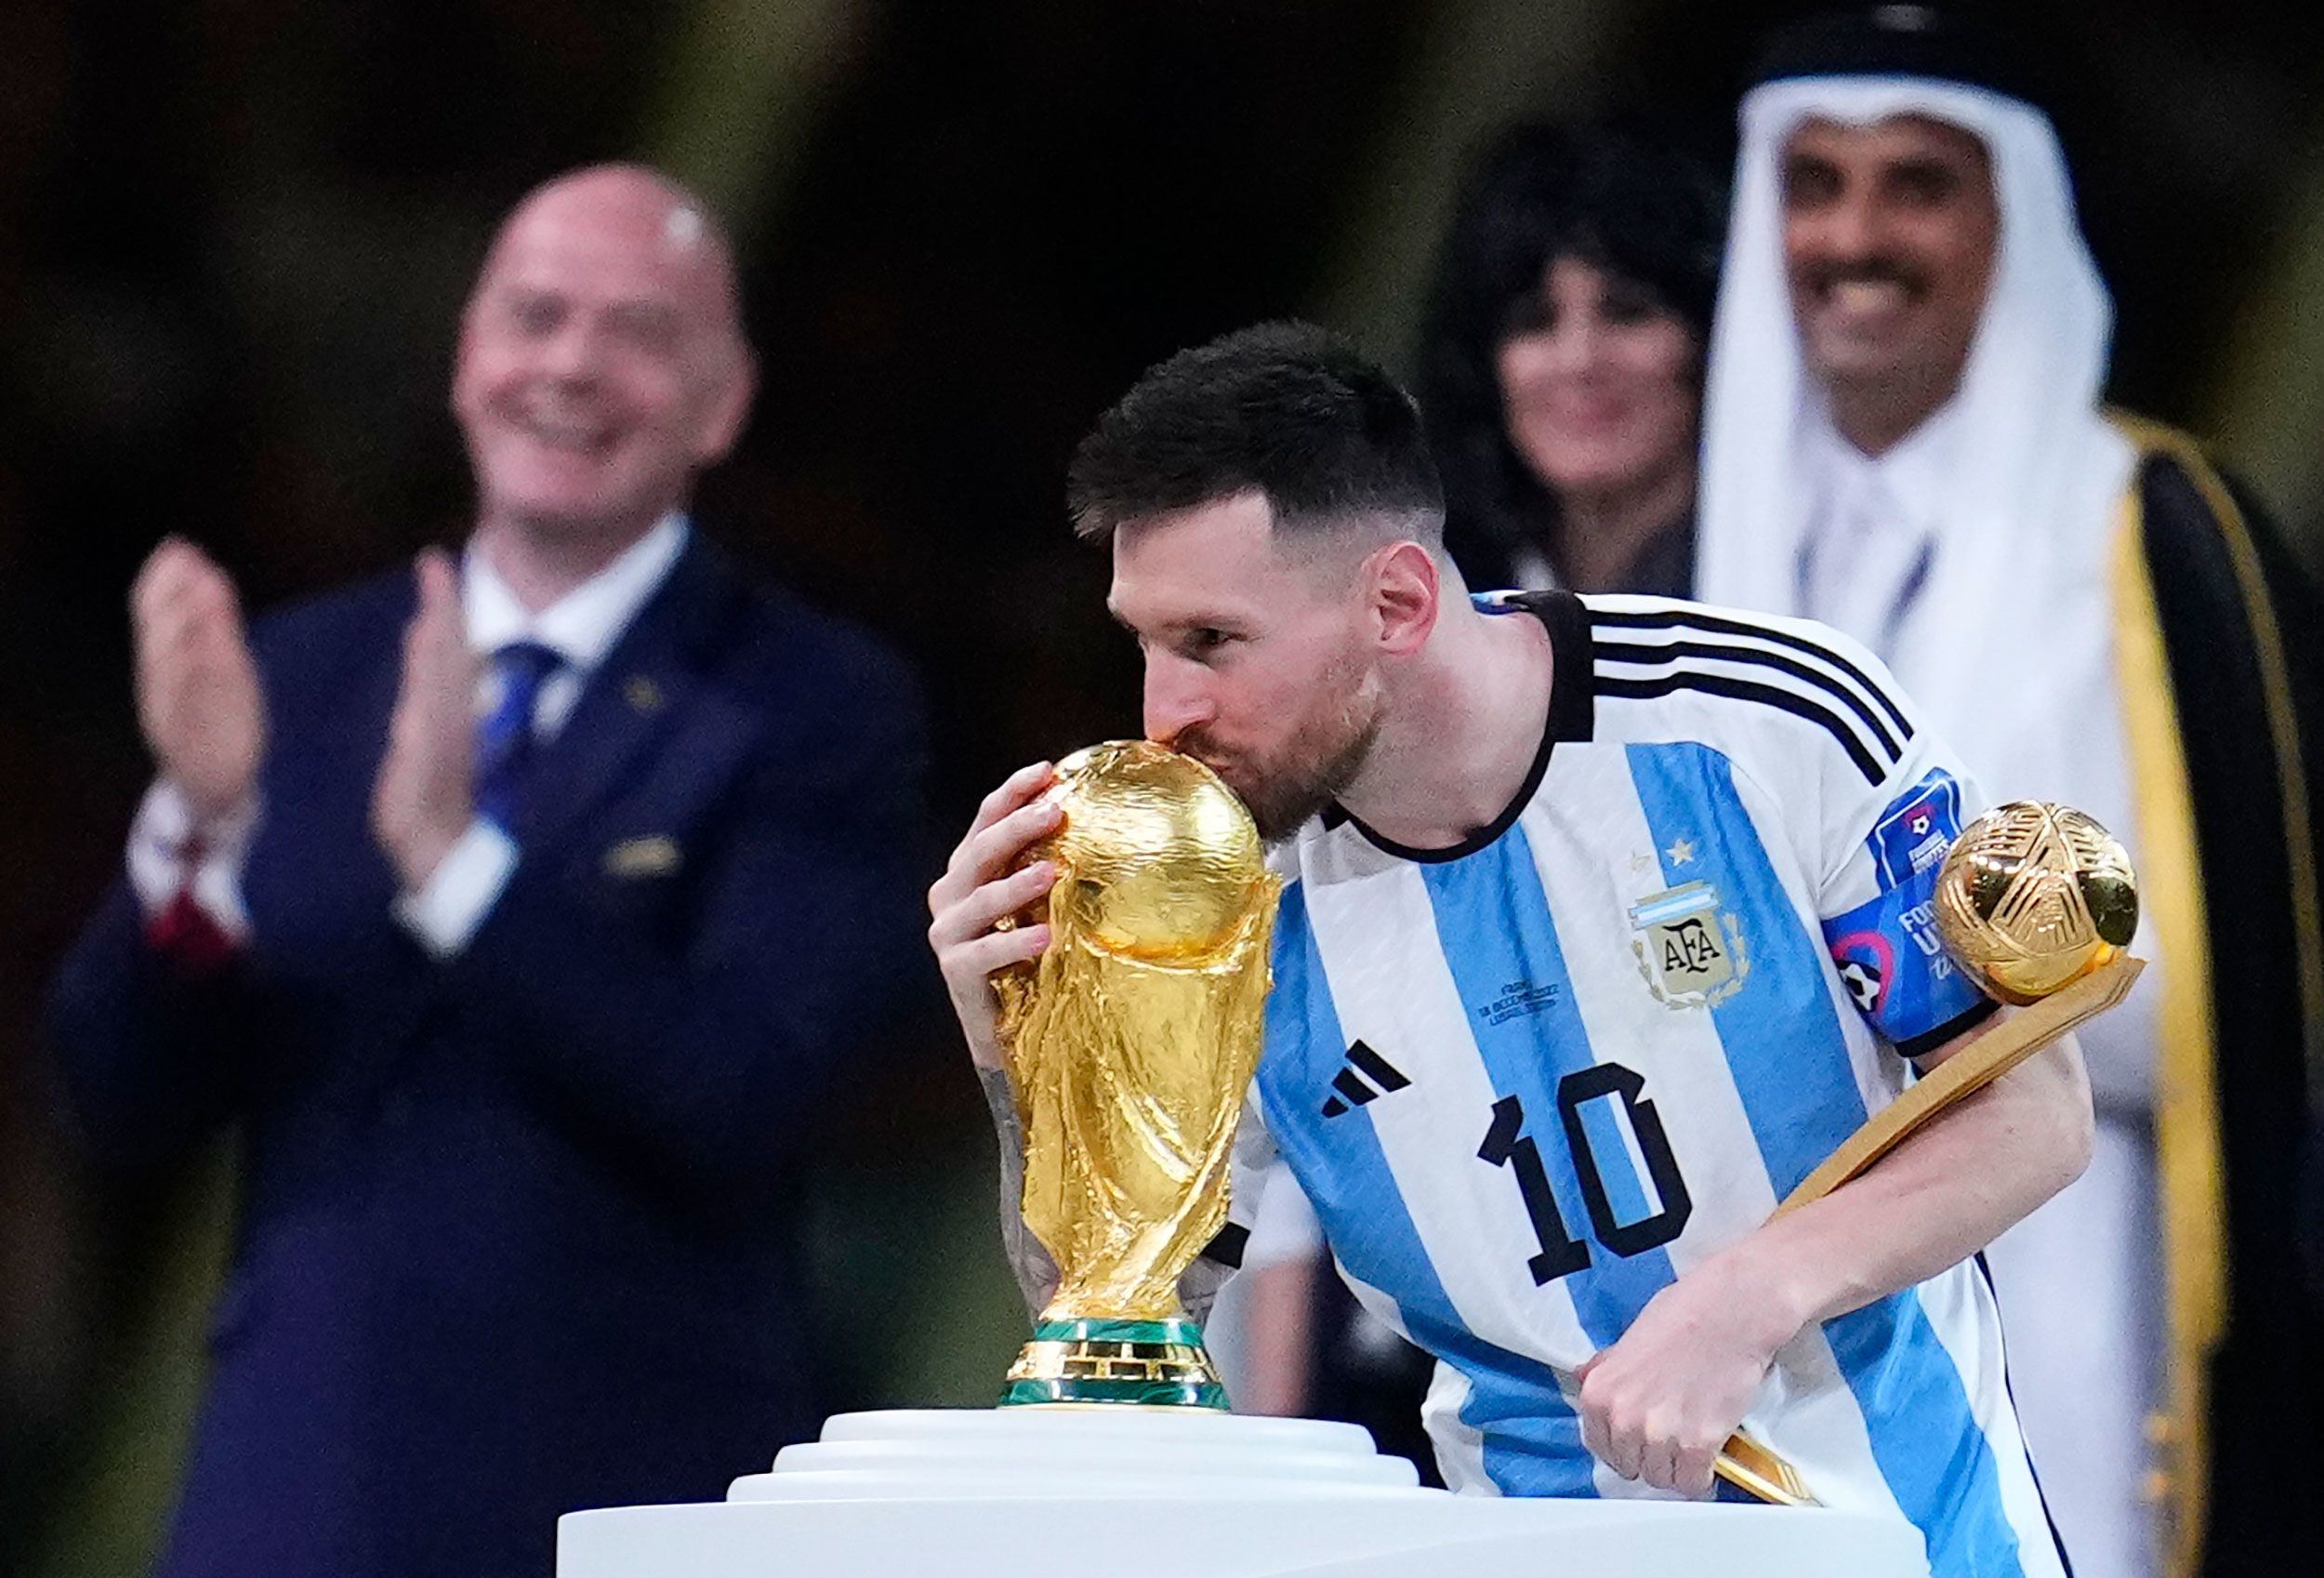 Argentina's Lionel Messi says he wants to continue 'living a few more games being world champion' | CNN